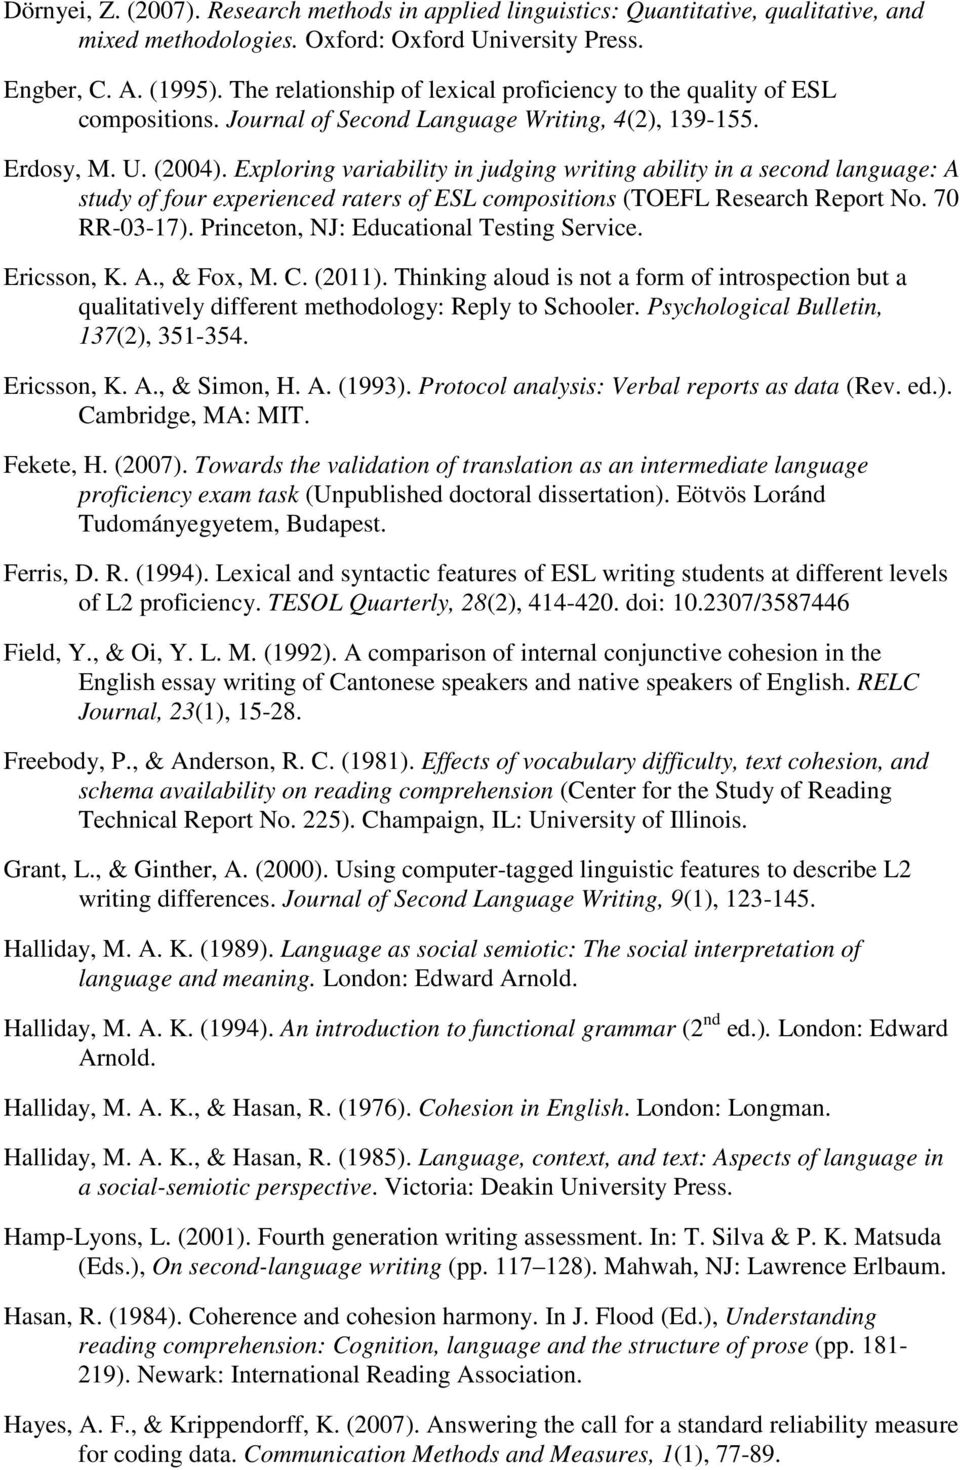 Exploring variability in judging writing ability in a second language: A study of four experienced raters of ESL compositions (TOEFL Research Report No. 70 RR-03-17).